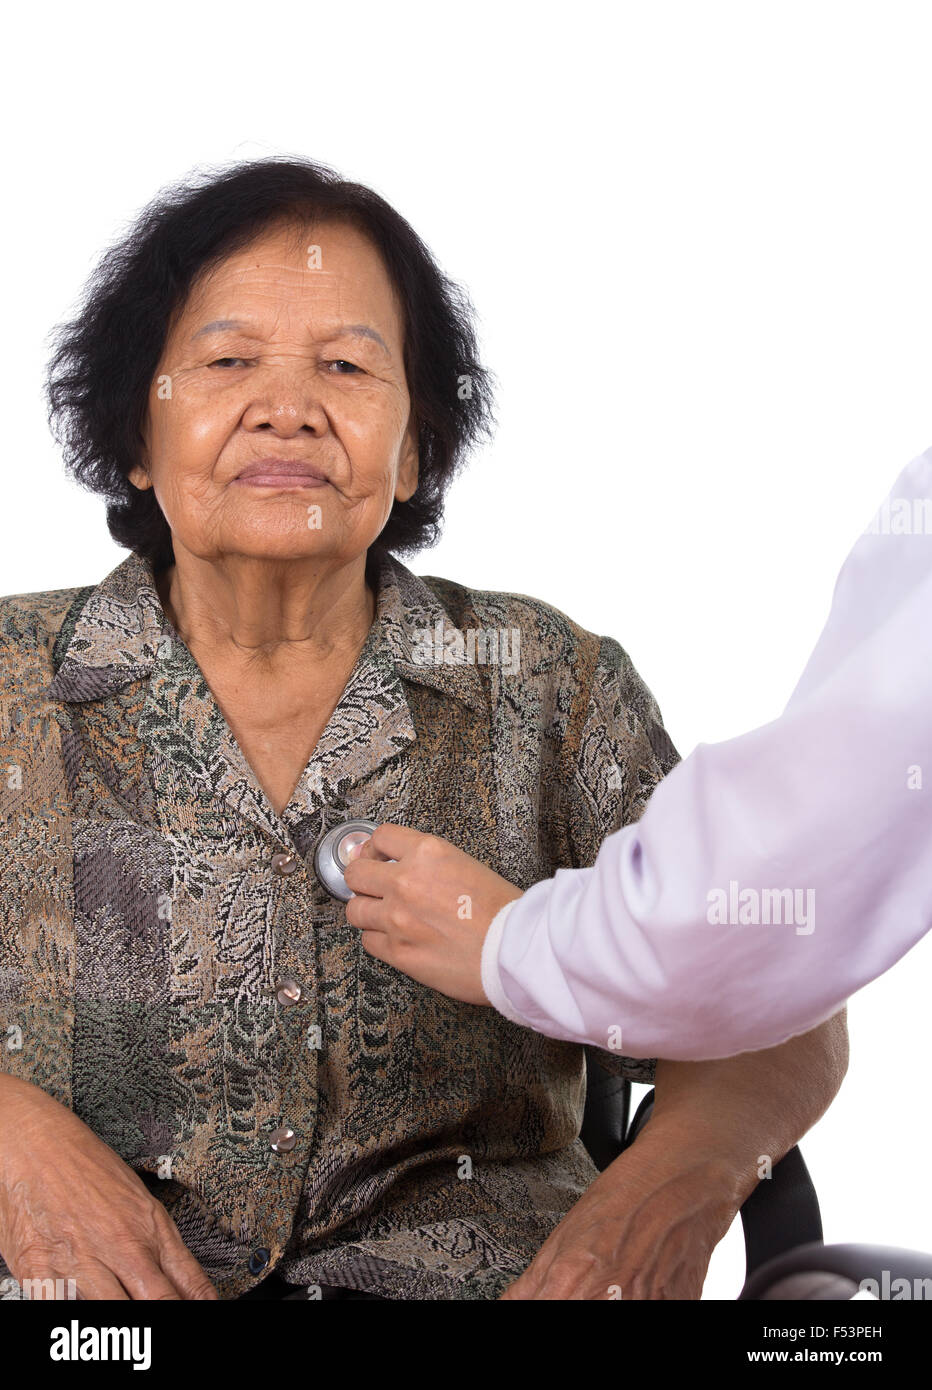 doctor listening to elderly patient's heart isolated on white background Stock Photo